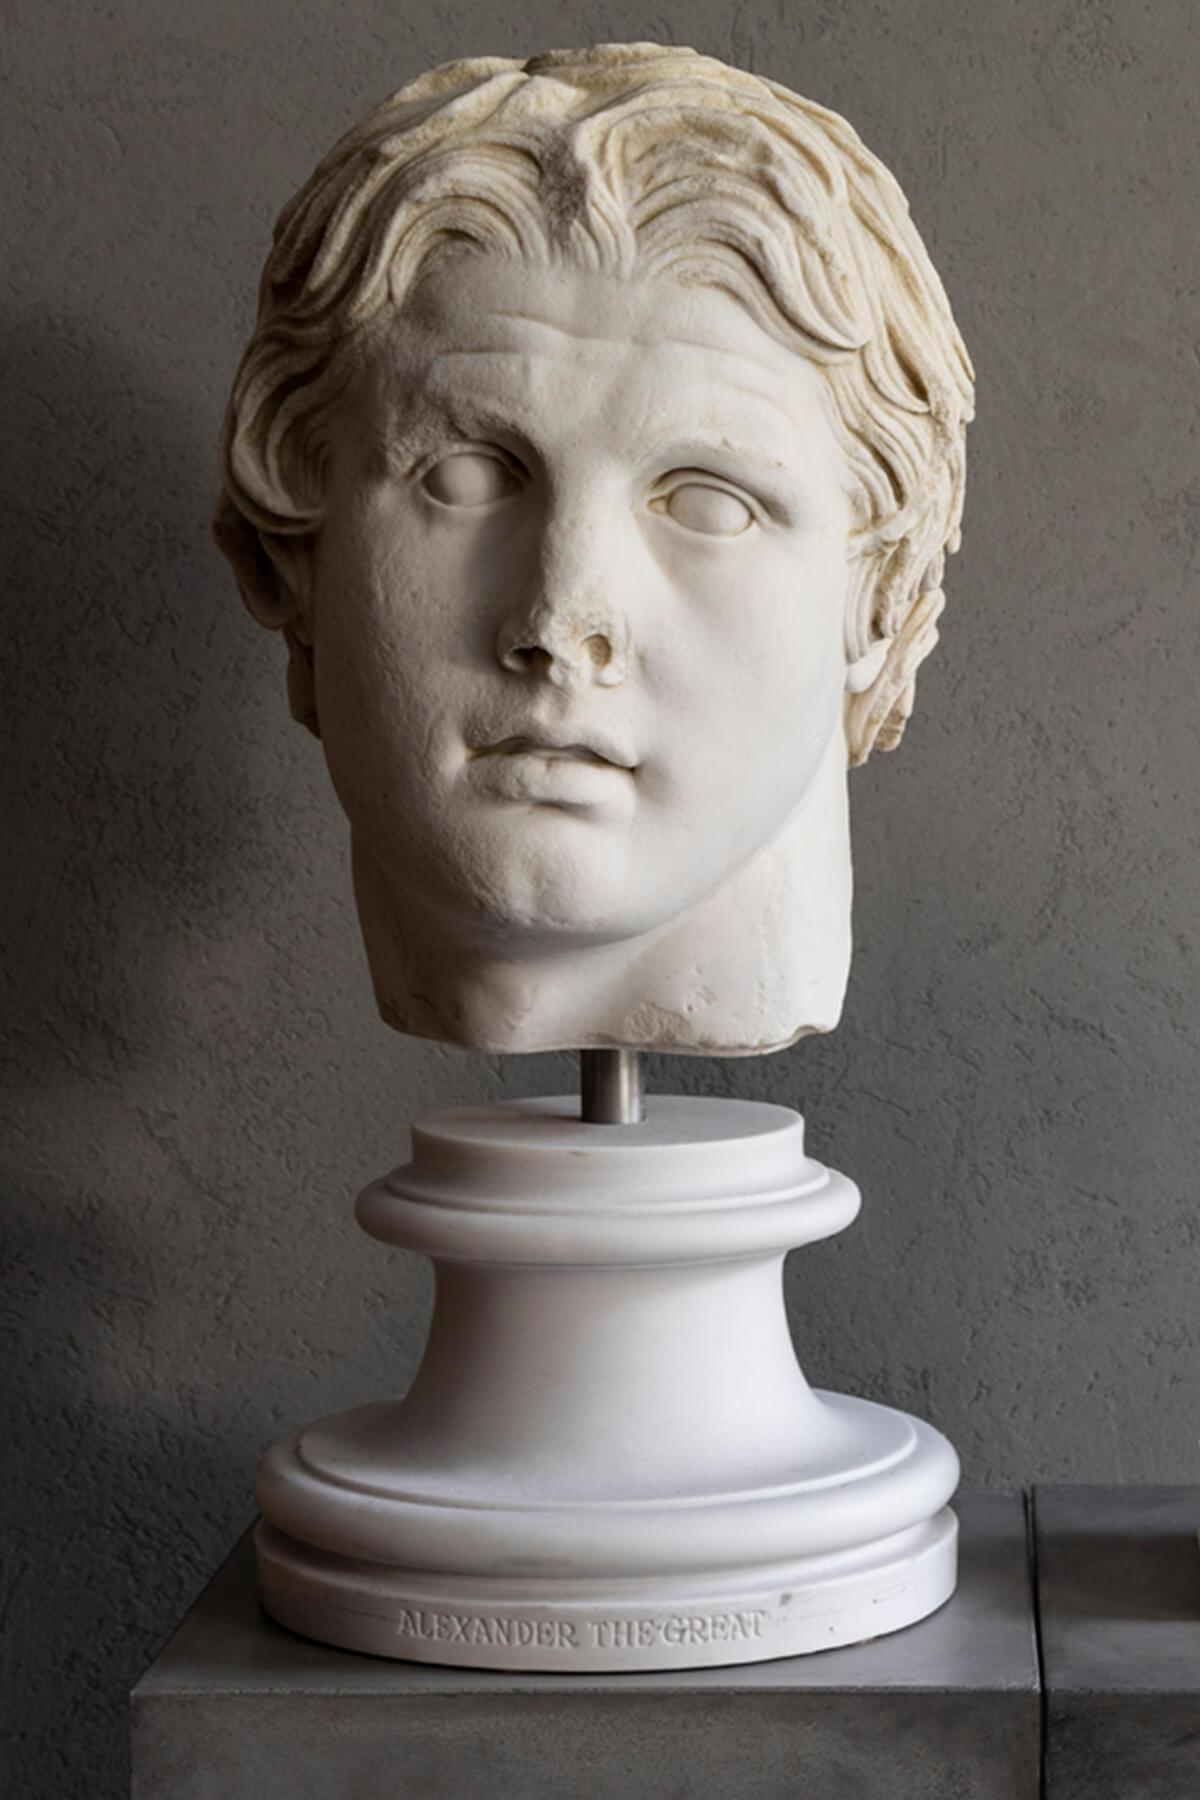 Height: 56 cm / Weight: 20 kg

Alexander, the real name of Macedonian III. Alexandros, commonly known as Alexander the Great, was king of the ancient Greek kingdom of Macedonia and a member of the Argead dynasty. He was born in Pella in 356 BC, and